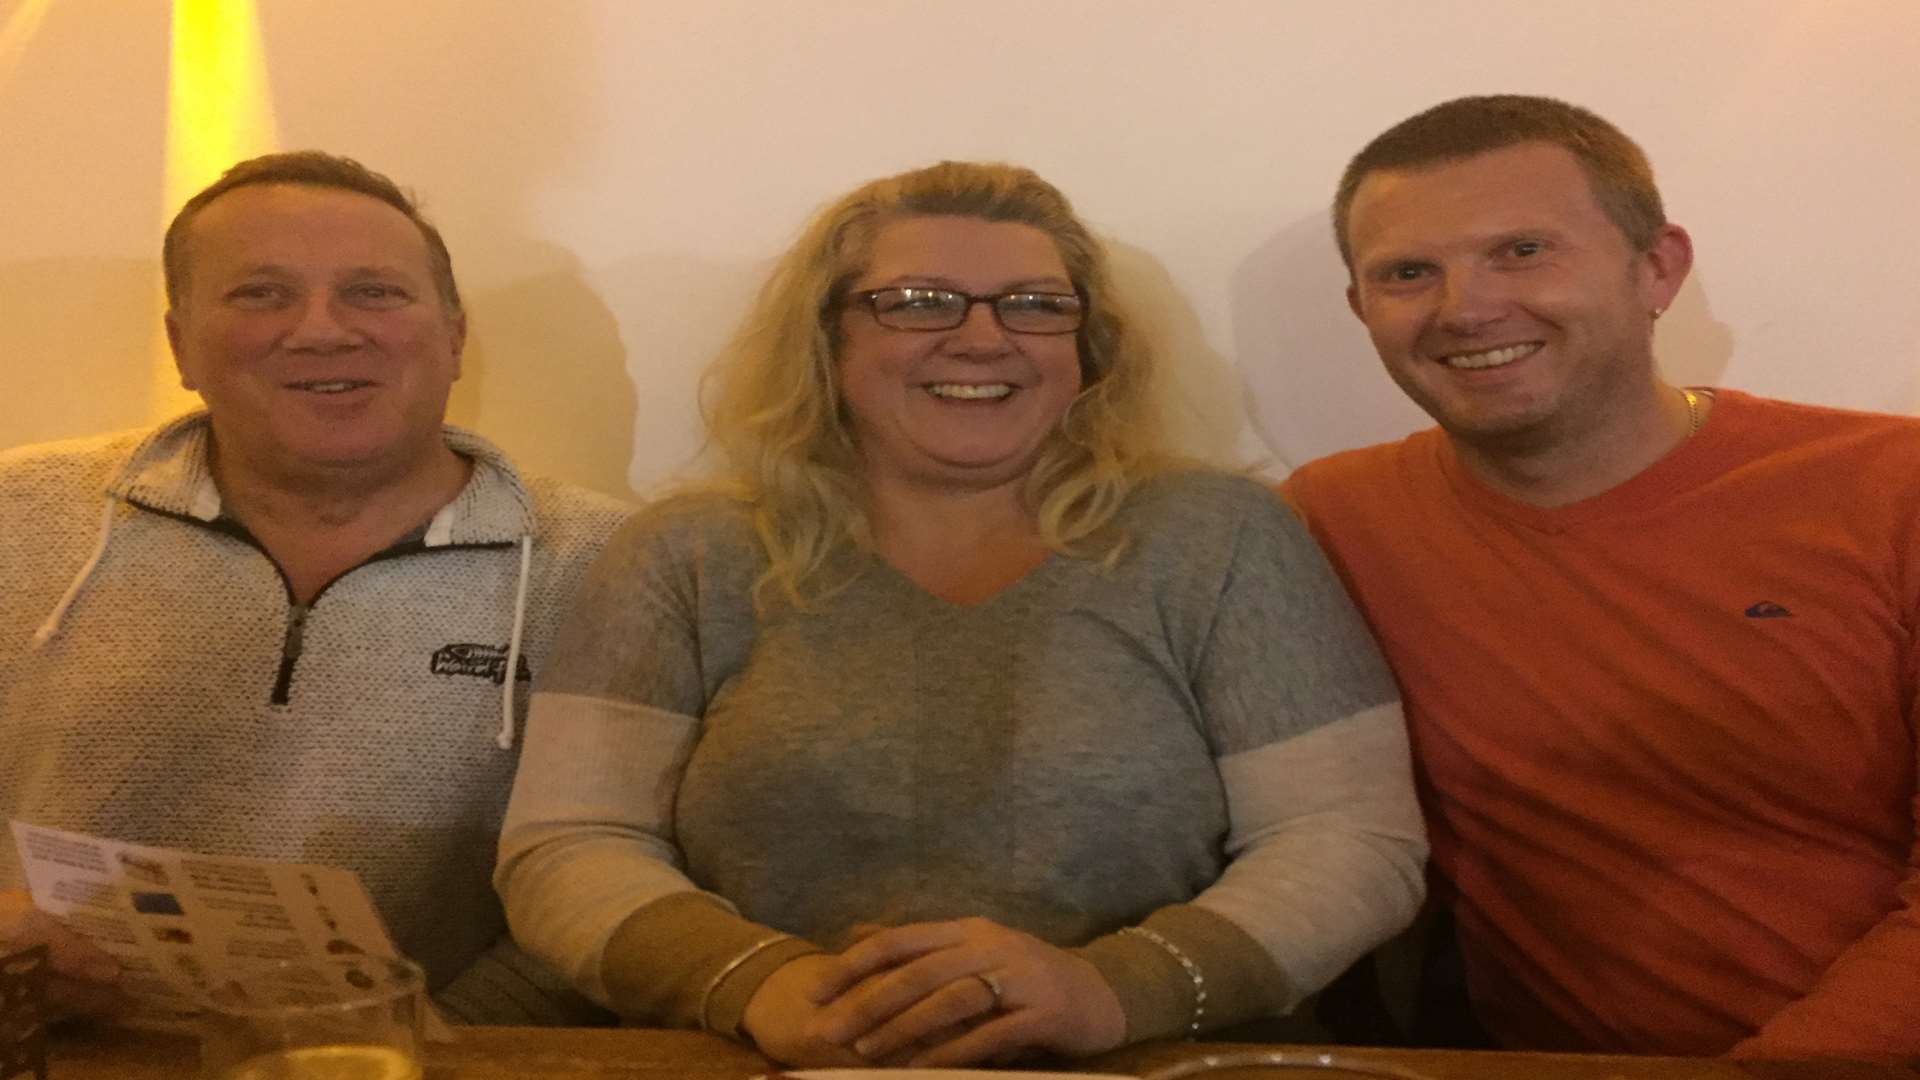 Michael Bunn, 57, Ruth Clist, 48, and Luke Rouse, 38, have become good friends